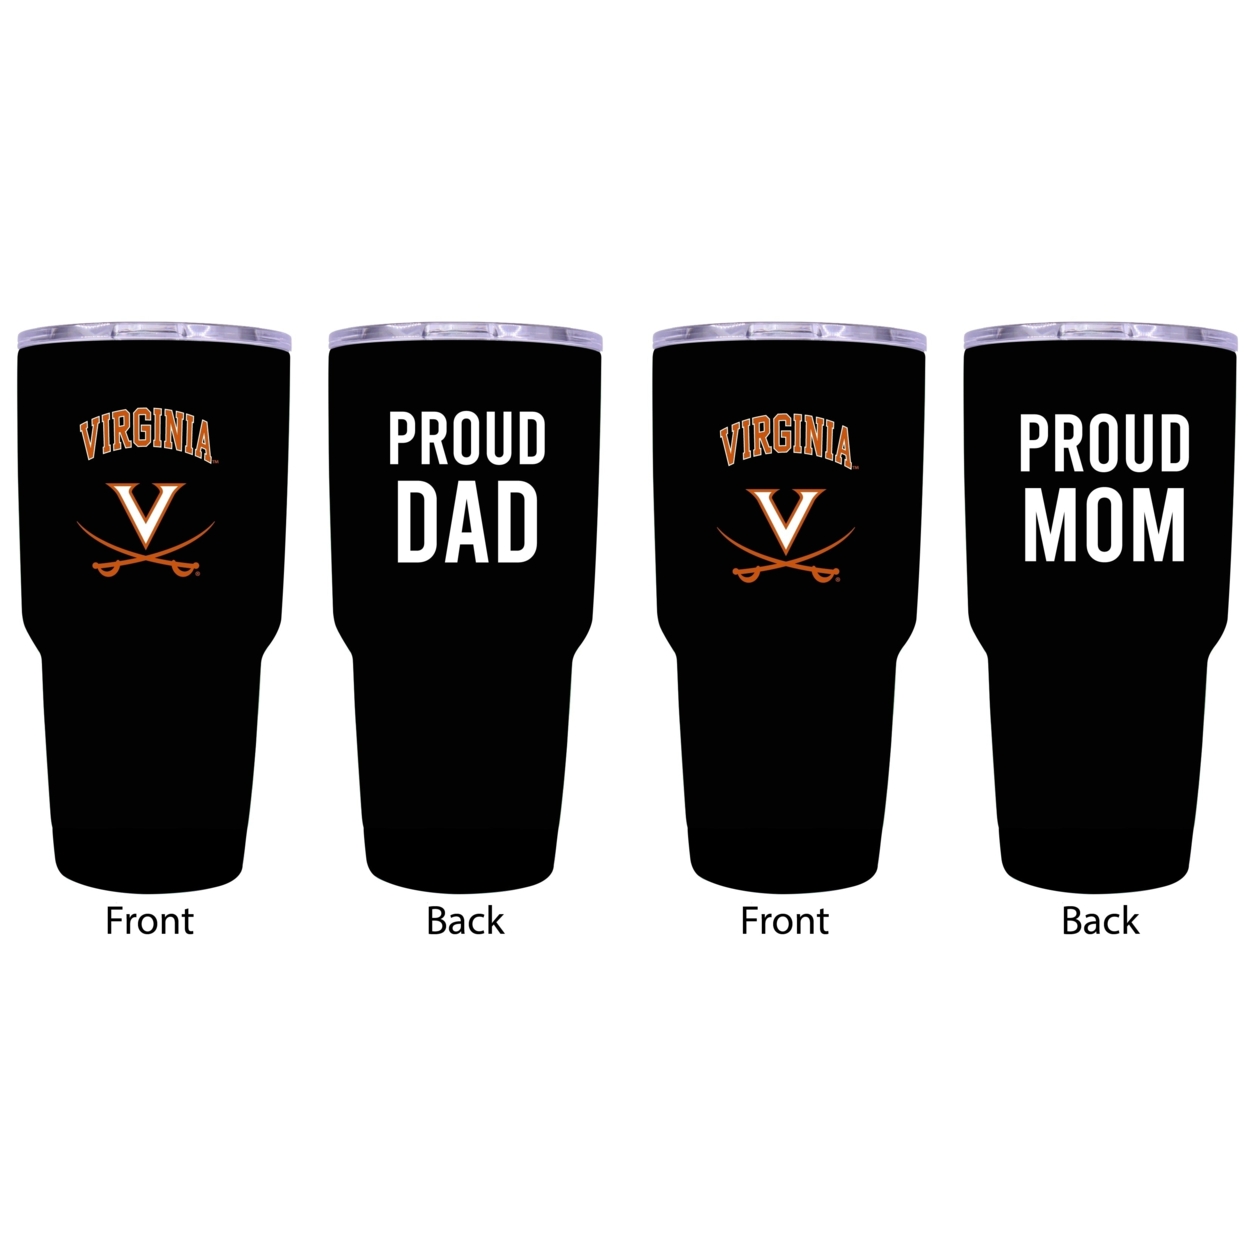 Virginia Cavaliers Proud Mom And Dad 24 Oz Insulated Stainless Steel Tumblers 2 Pack Black.